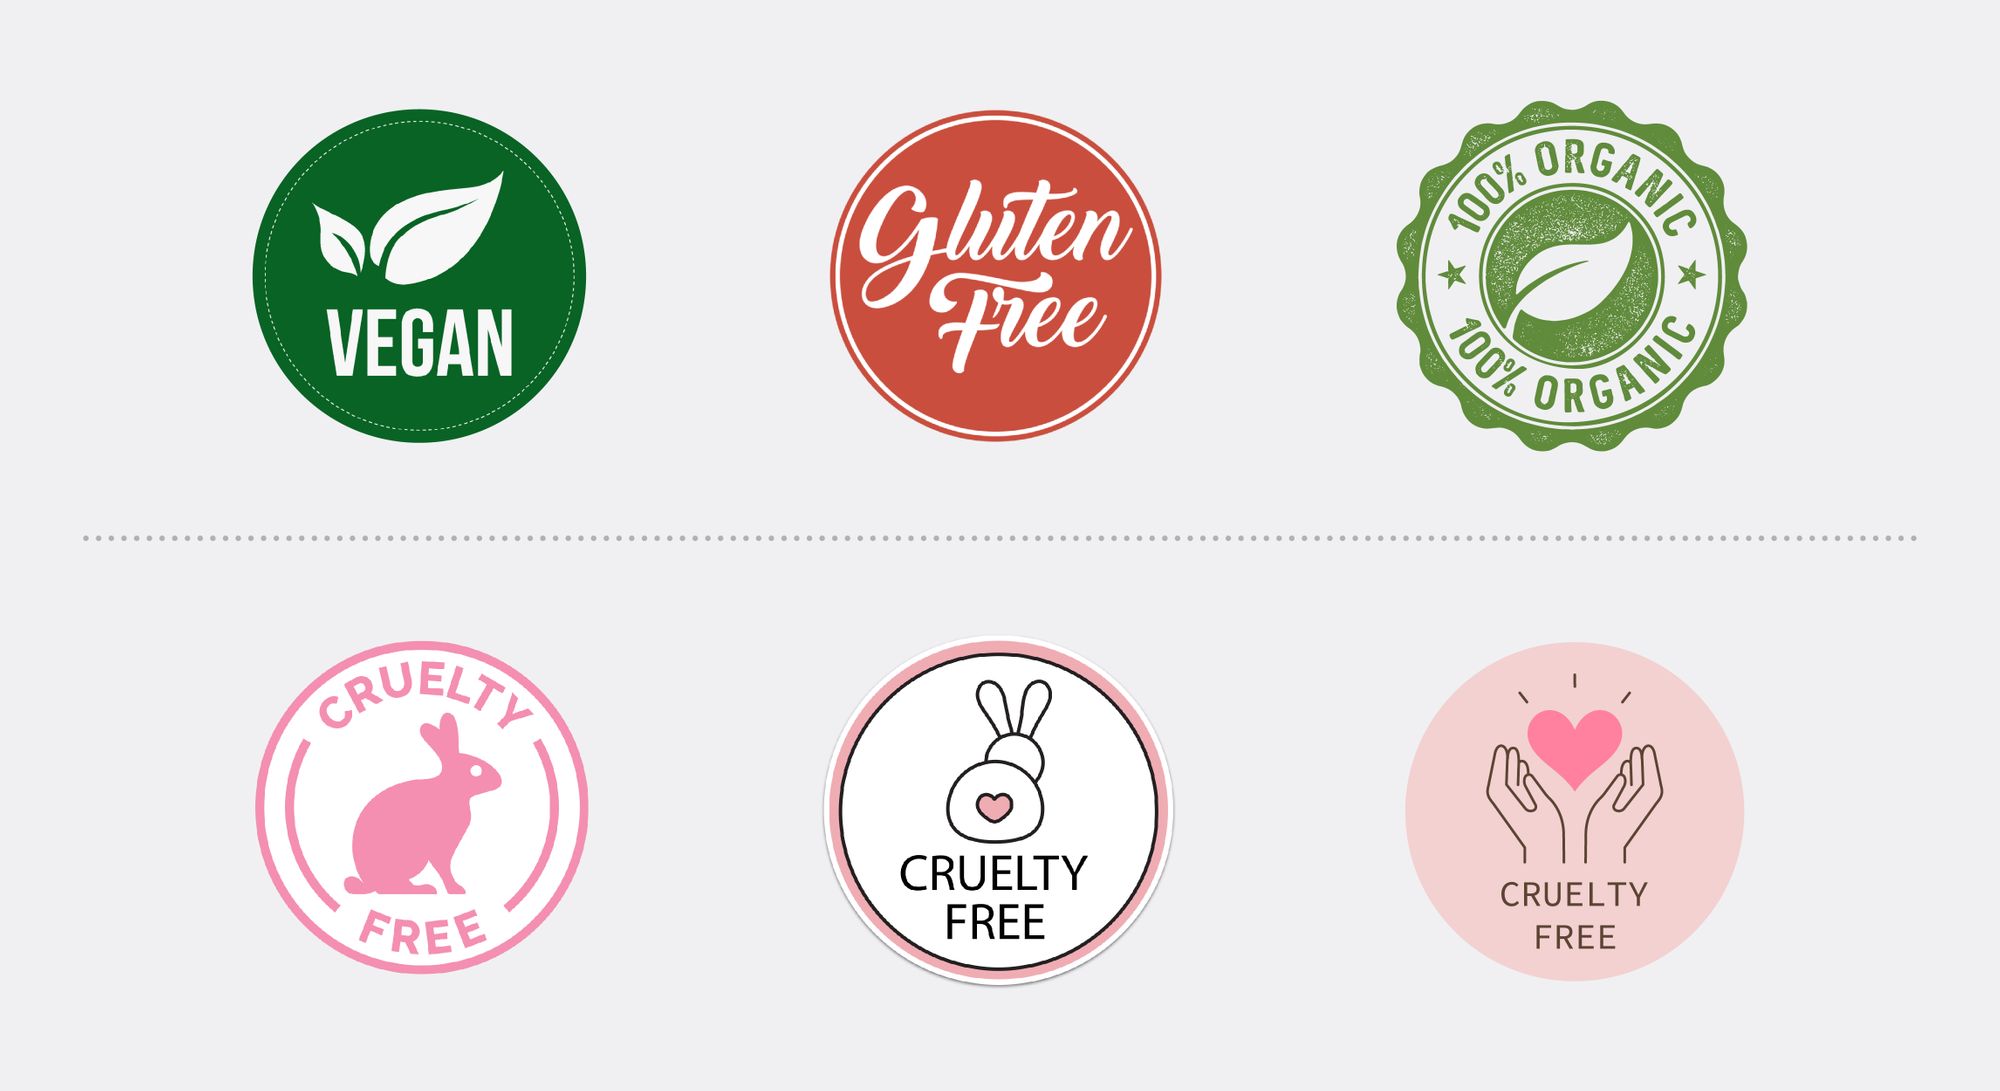 Examples of category-specific trust badges: Vegan, gluten-free, 100% organic, cruelty-free